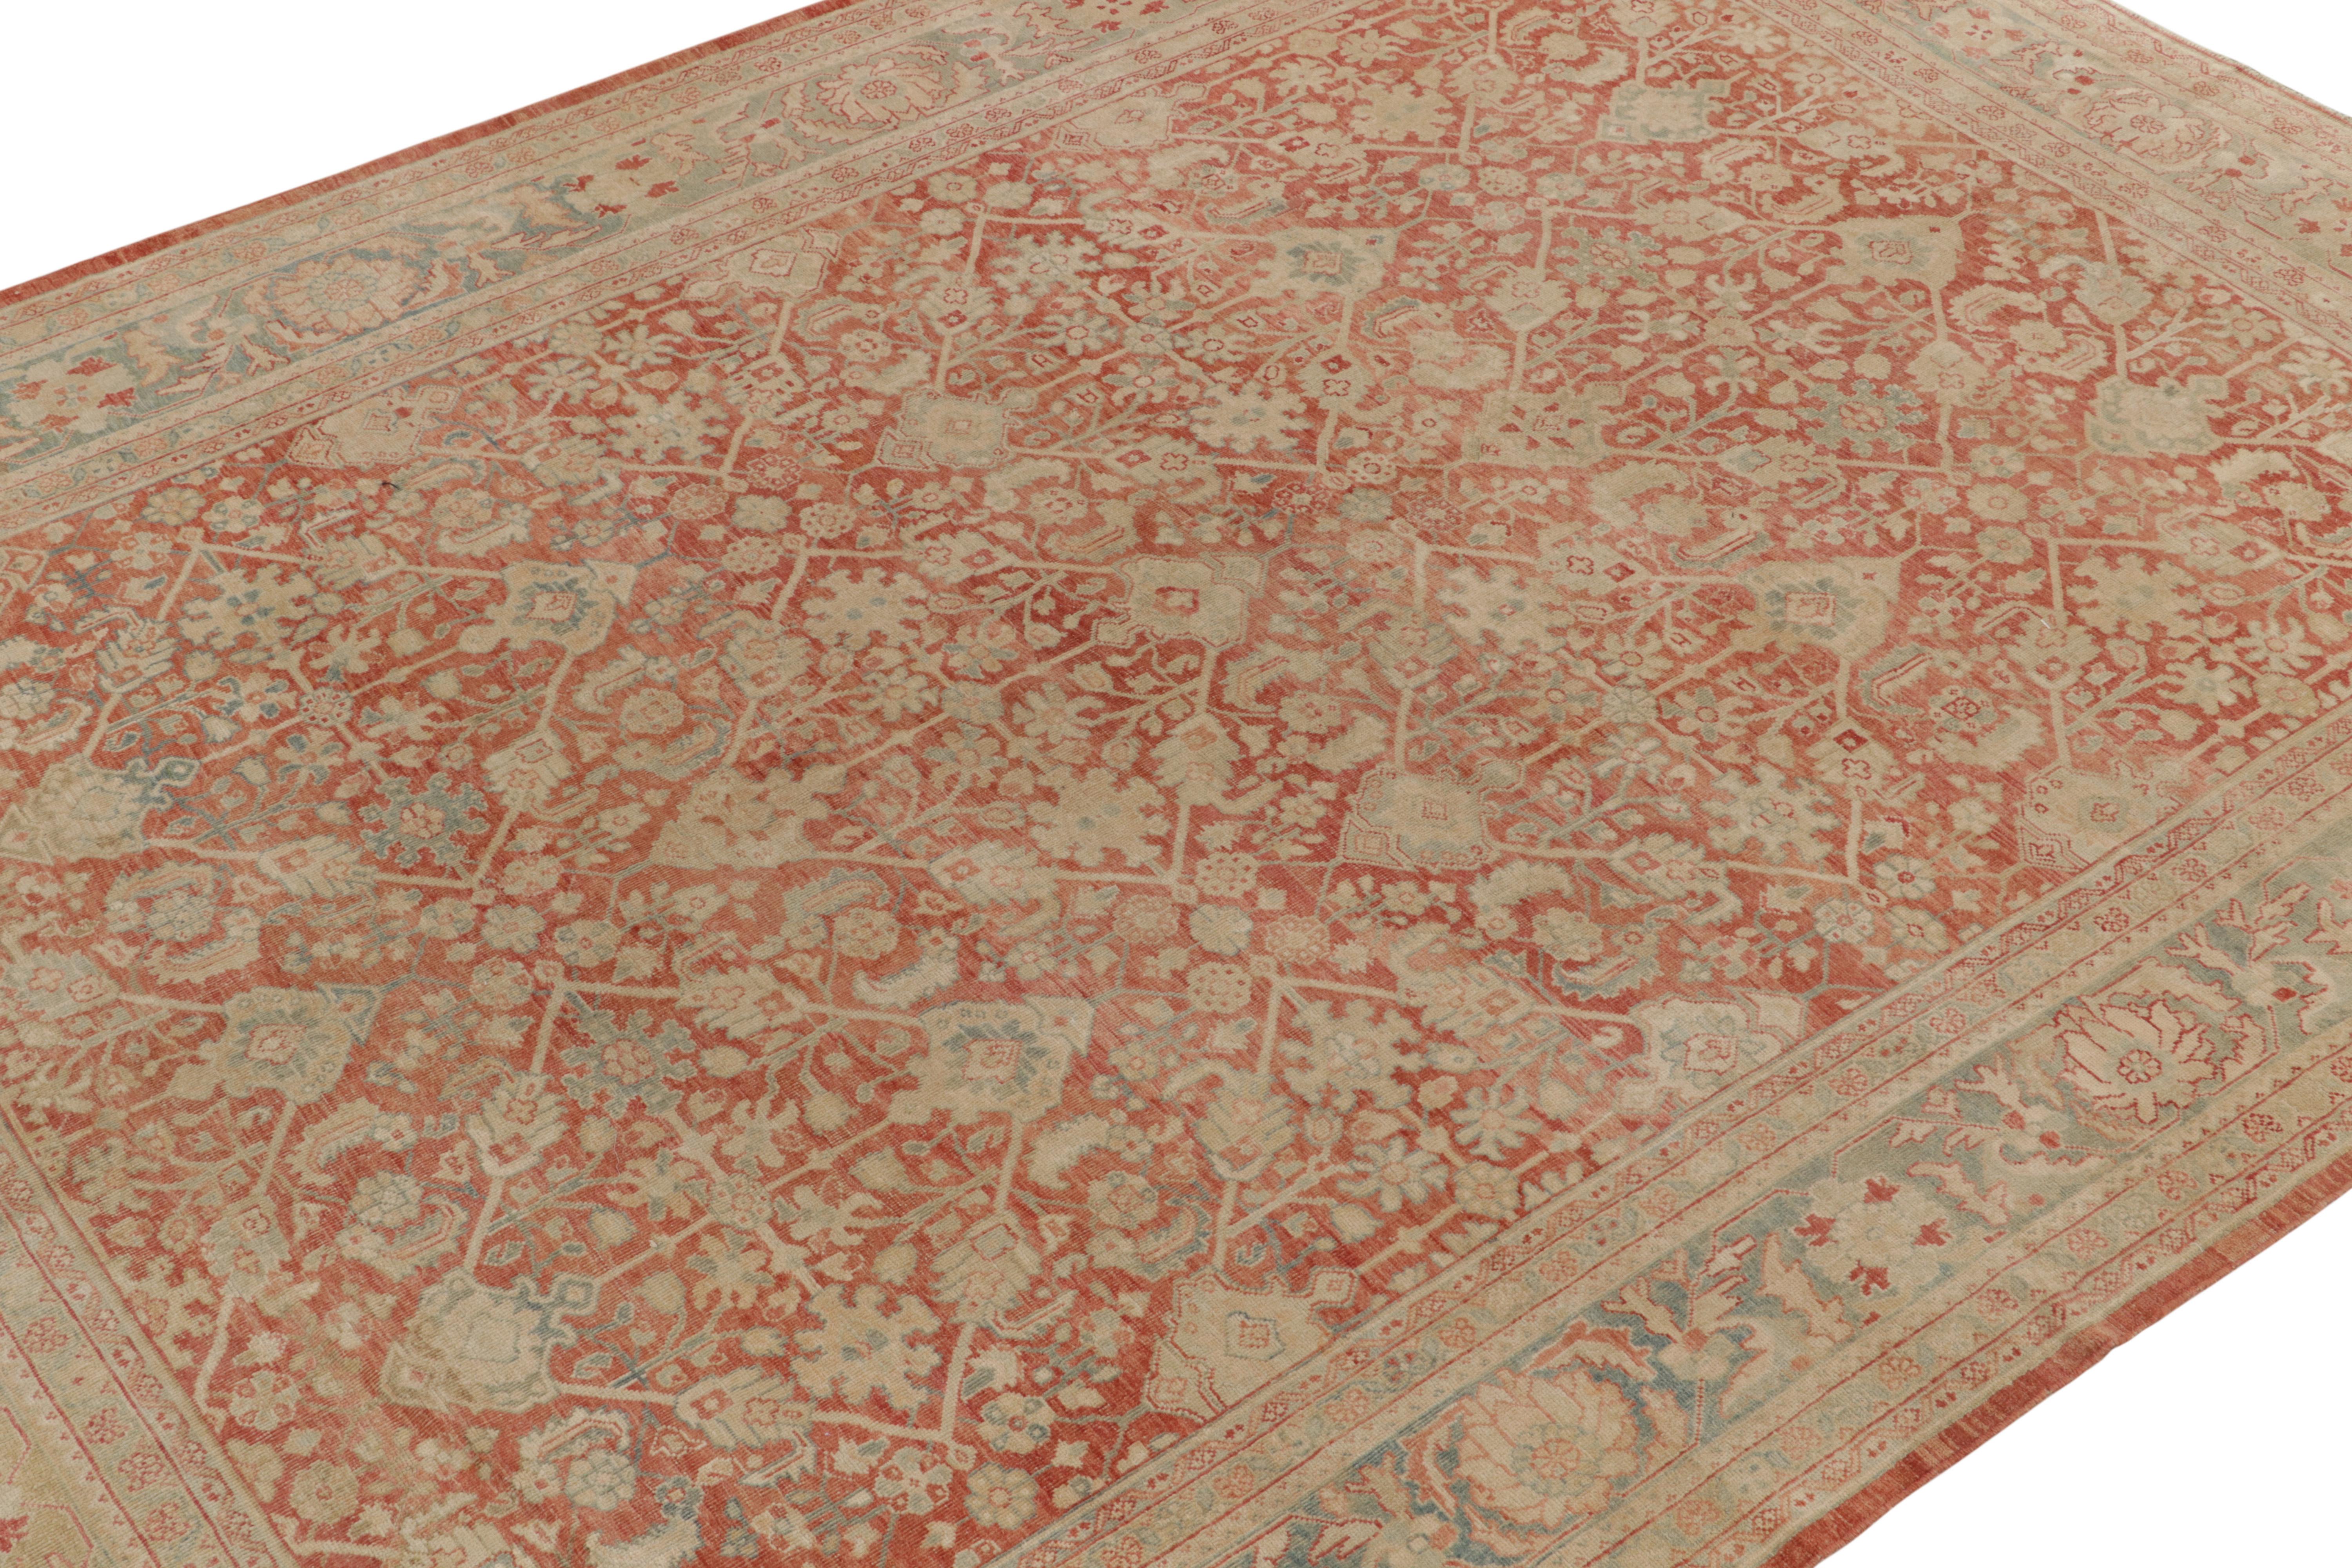 Hand-Knotted Antique Tabriz Rug in Red & Beige-Brown Floral Pattern by Rug & Kilim For Sale